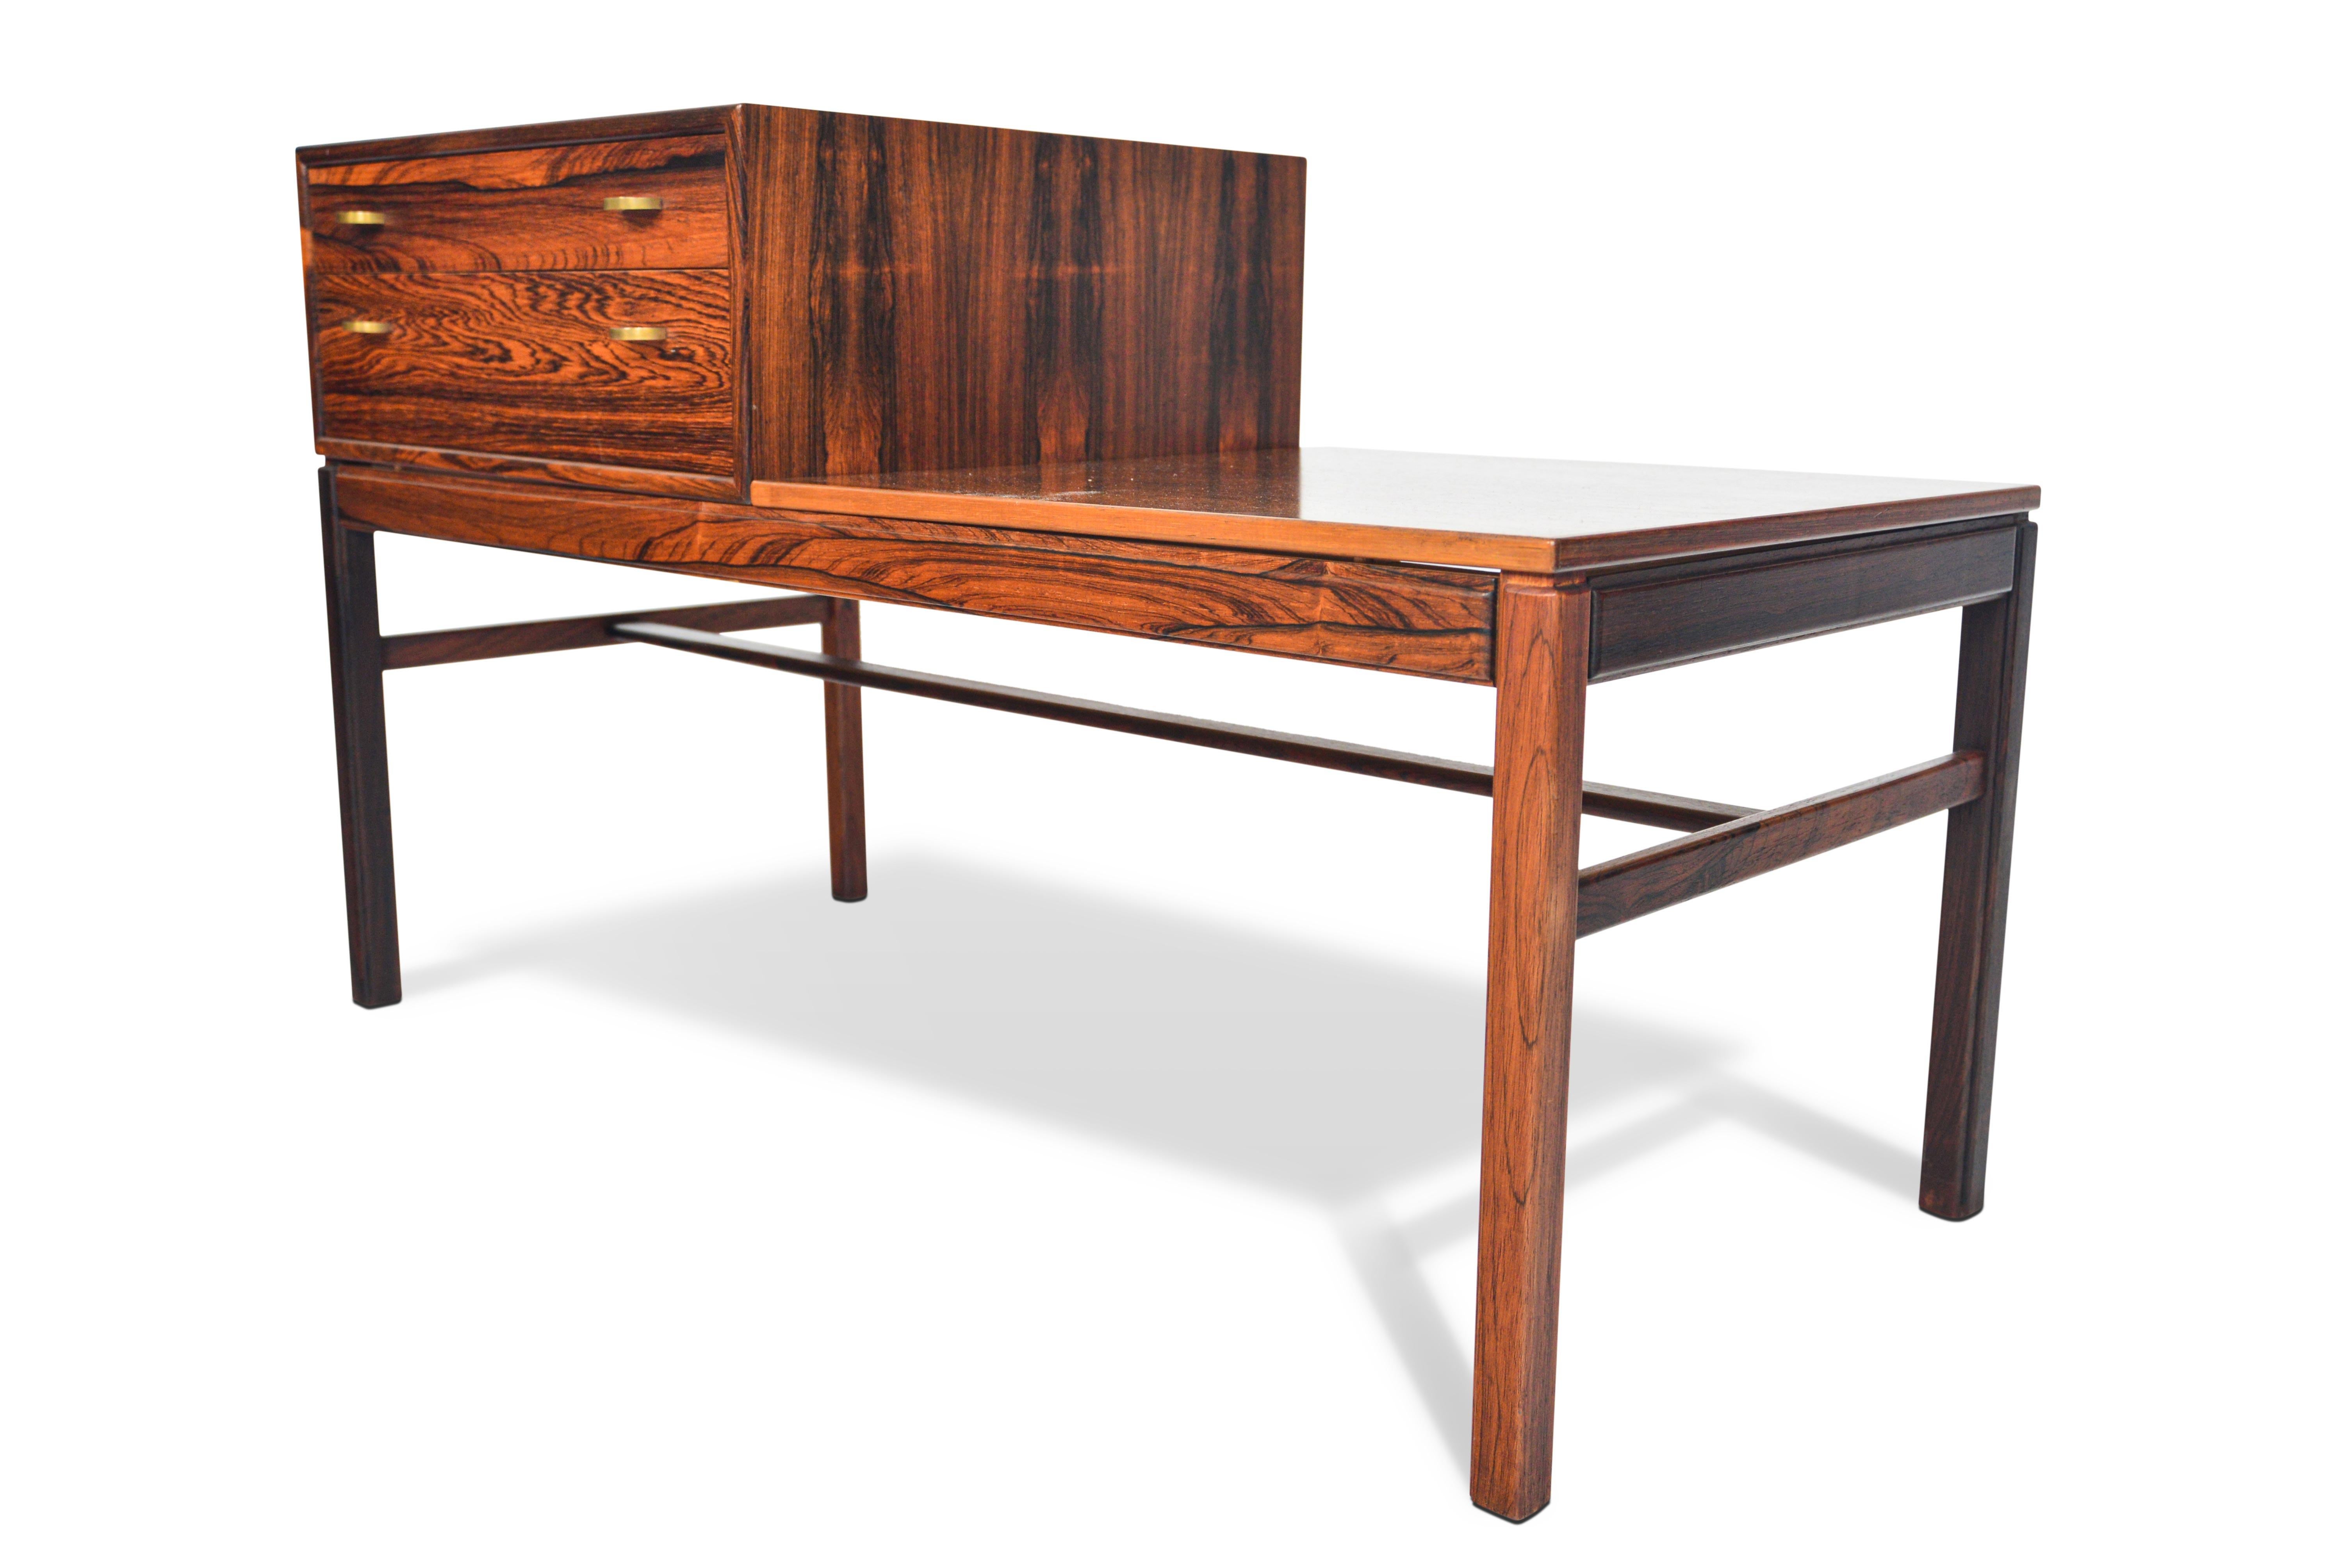 20th Century 'Casino' Model Telephone Bench in Rosewood